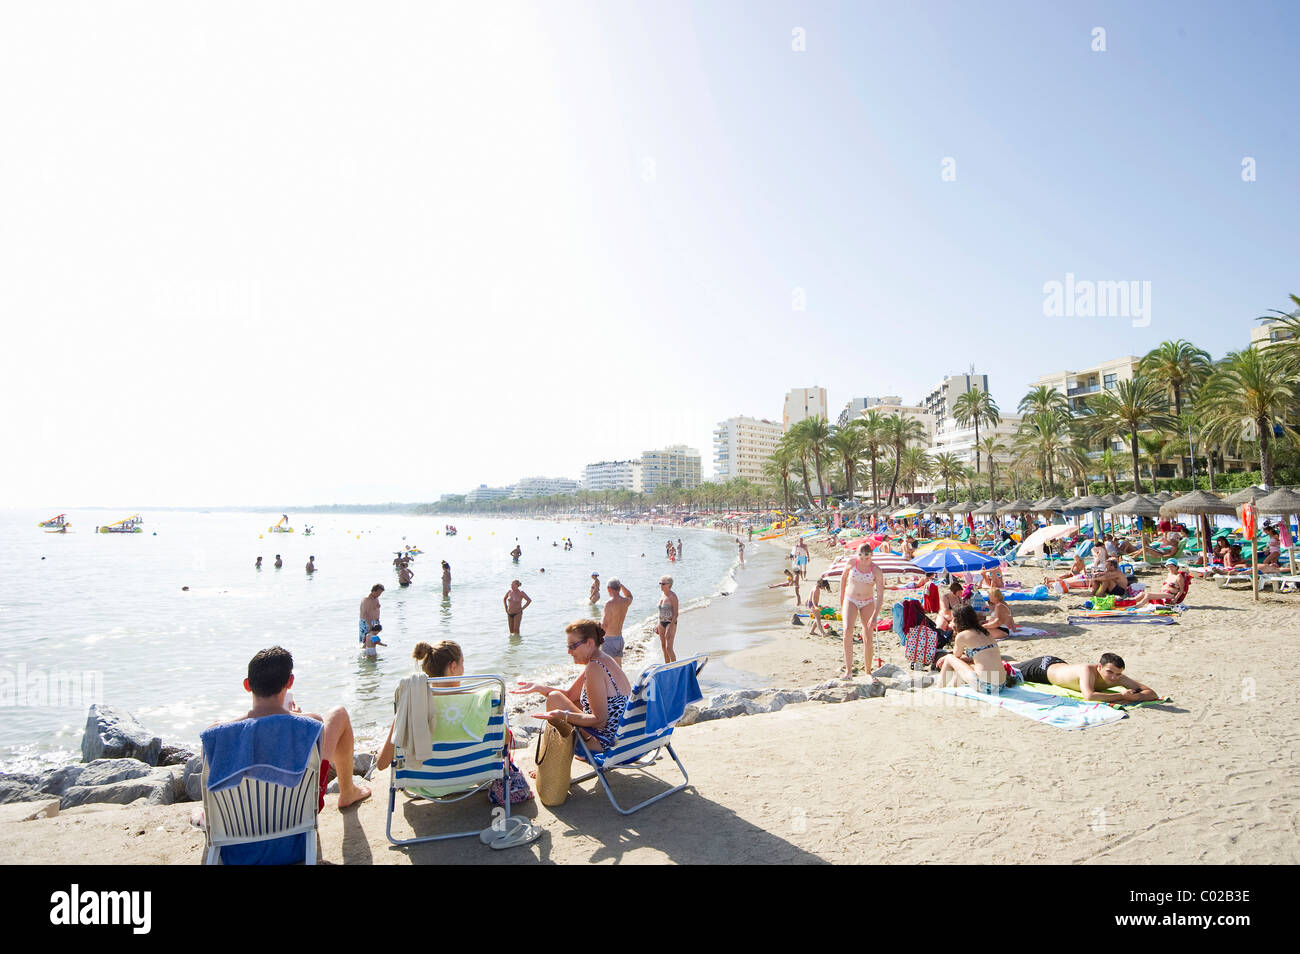 People on the beach, Marbella, Costa del Sol, Andalusia, Spain, Europe Stock Photo